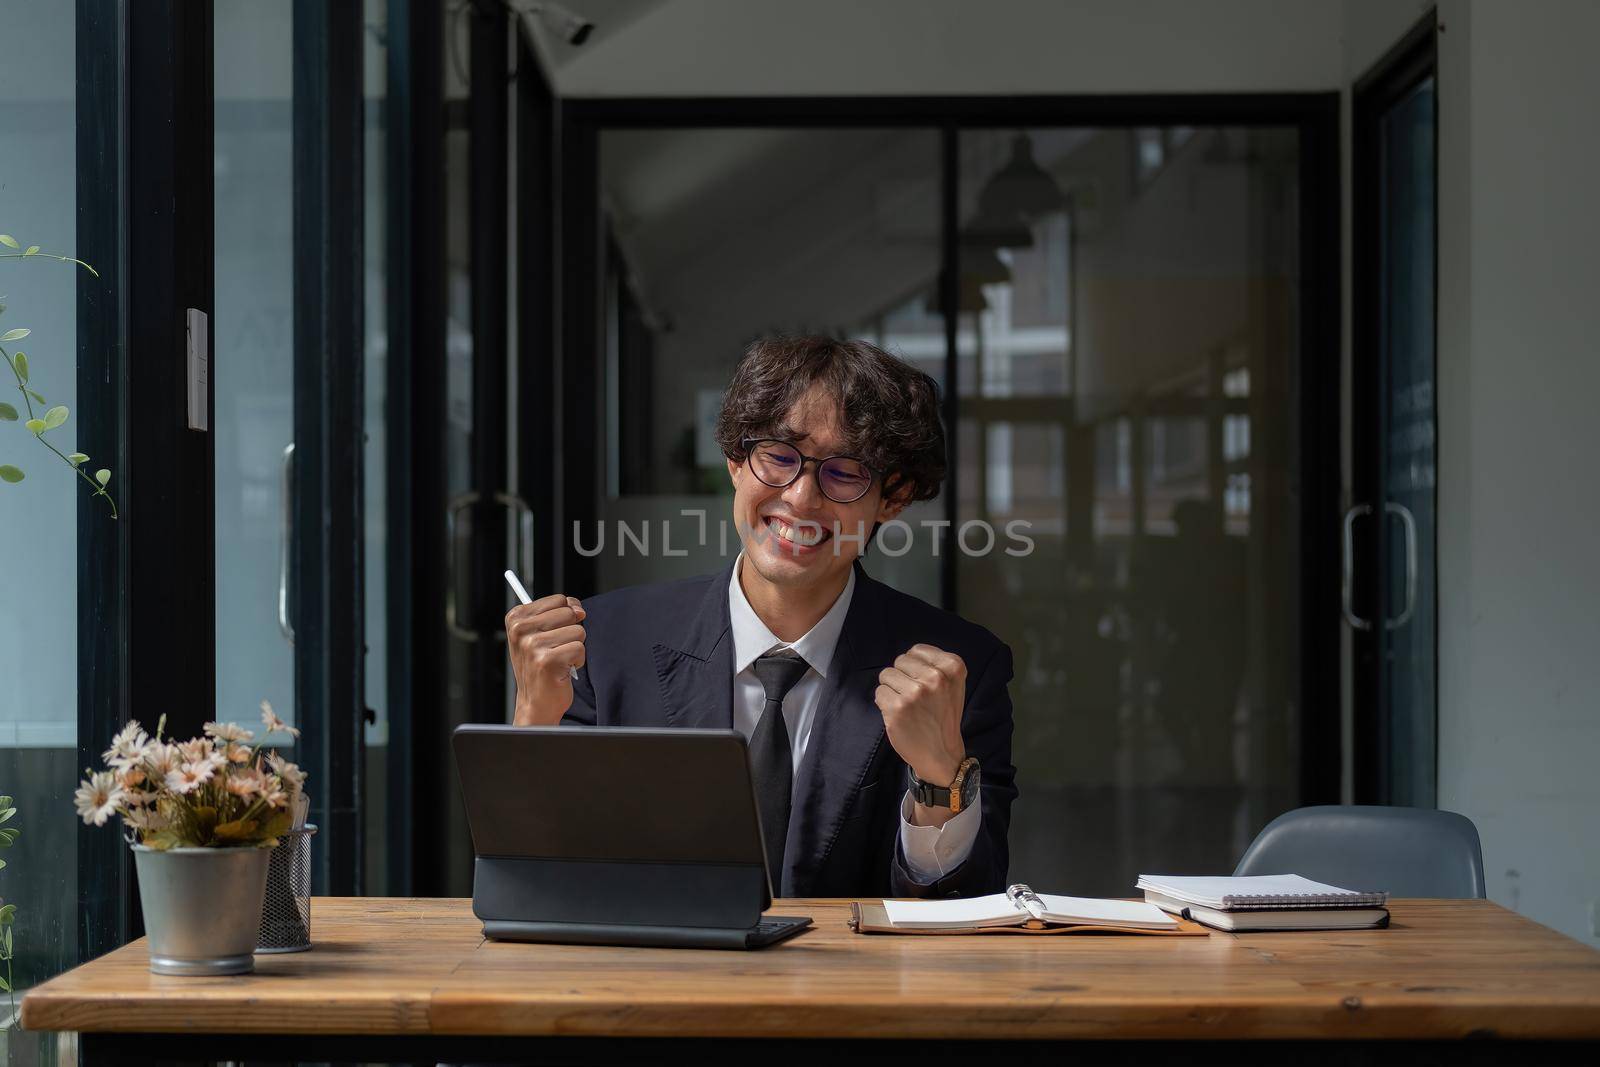 Overwhelmed by success young cheerful adult casual businessman smiling and vividly celebrating with raised hands and strong voice successful news email or business deal